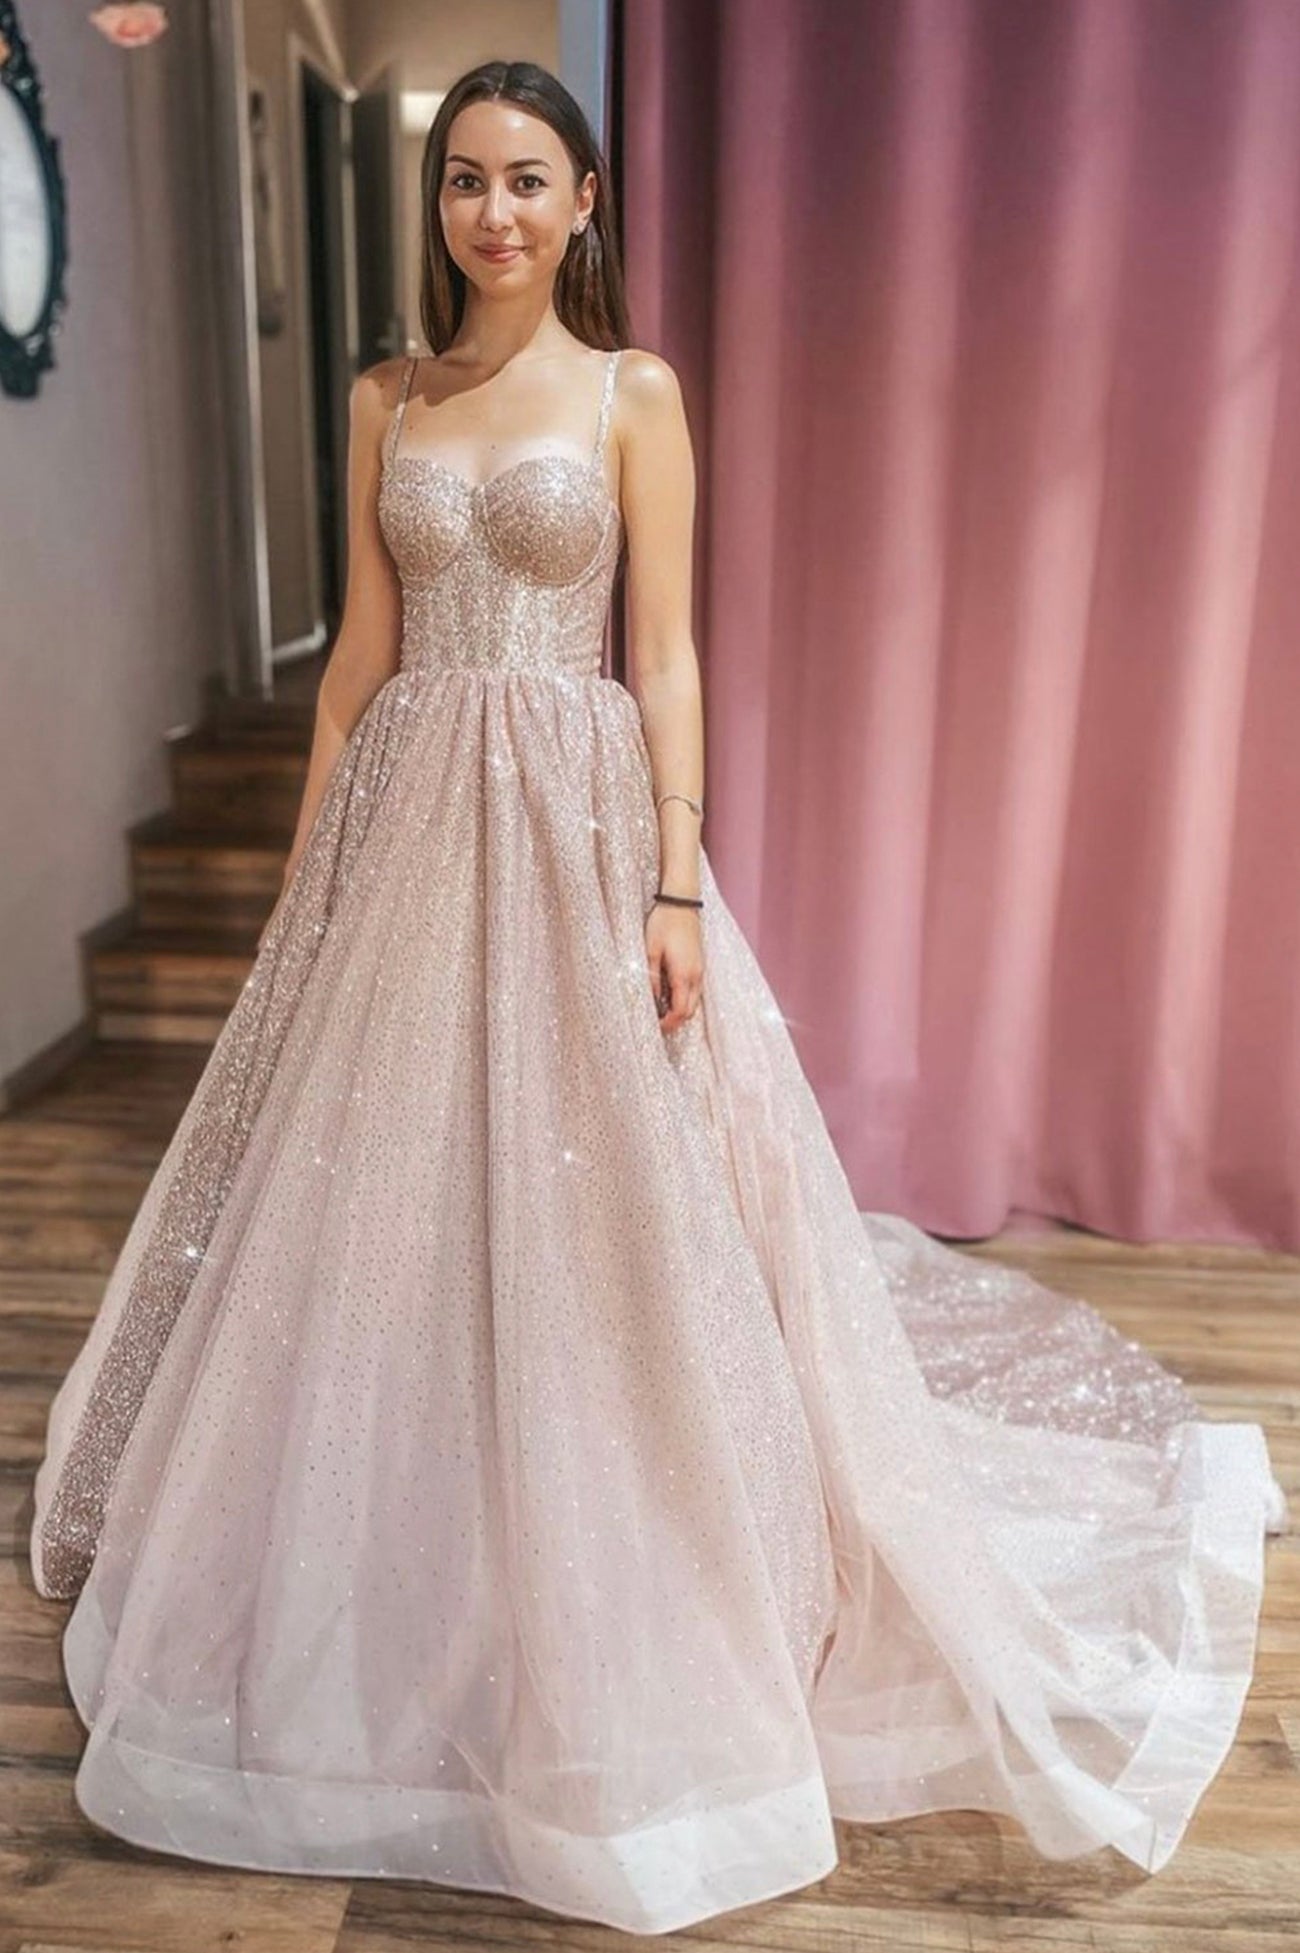 Shiny Tulle Sequins Long Prom Dress, A-Line Spaghetti Strap Evening Dress